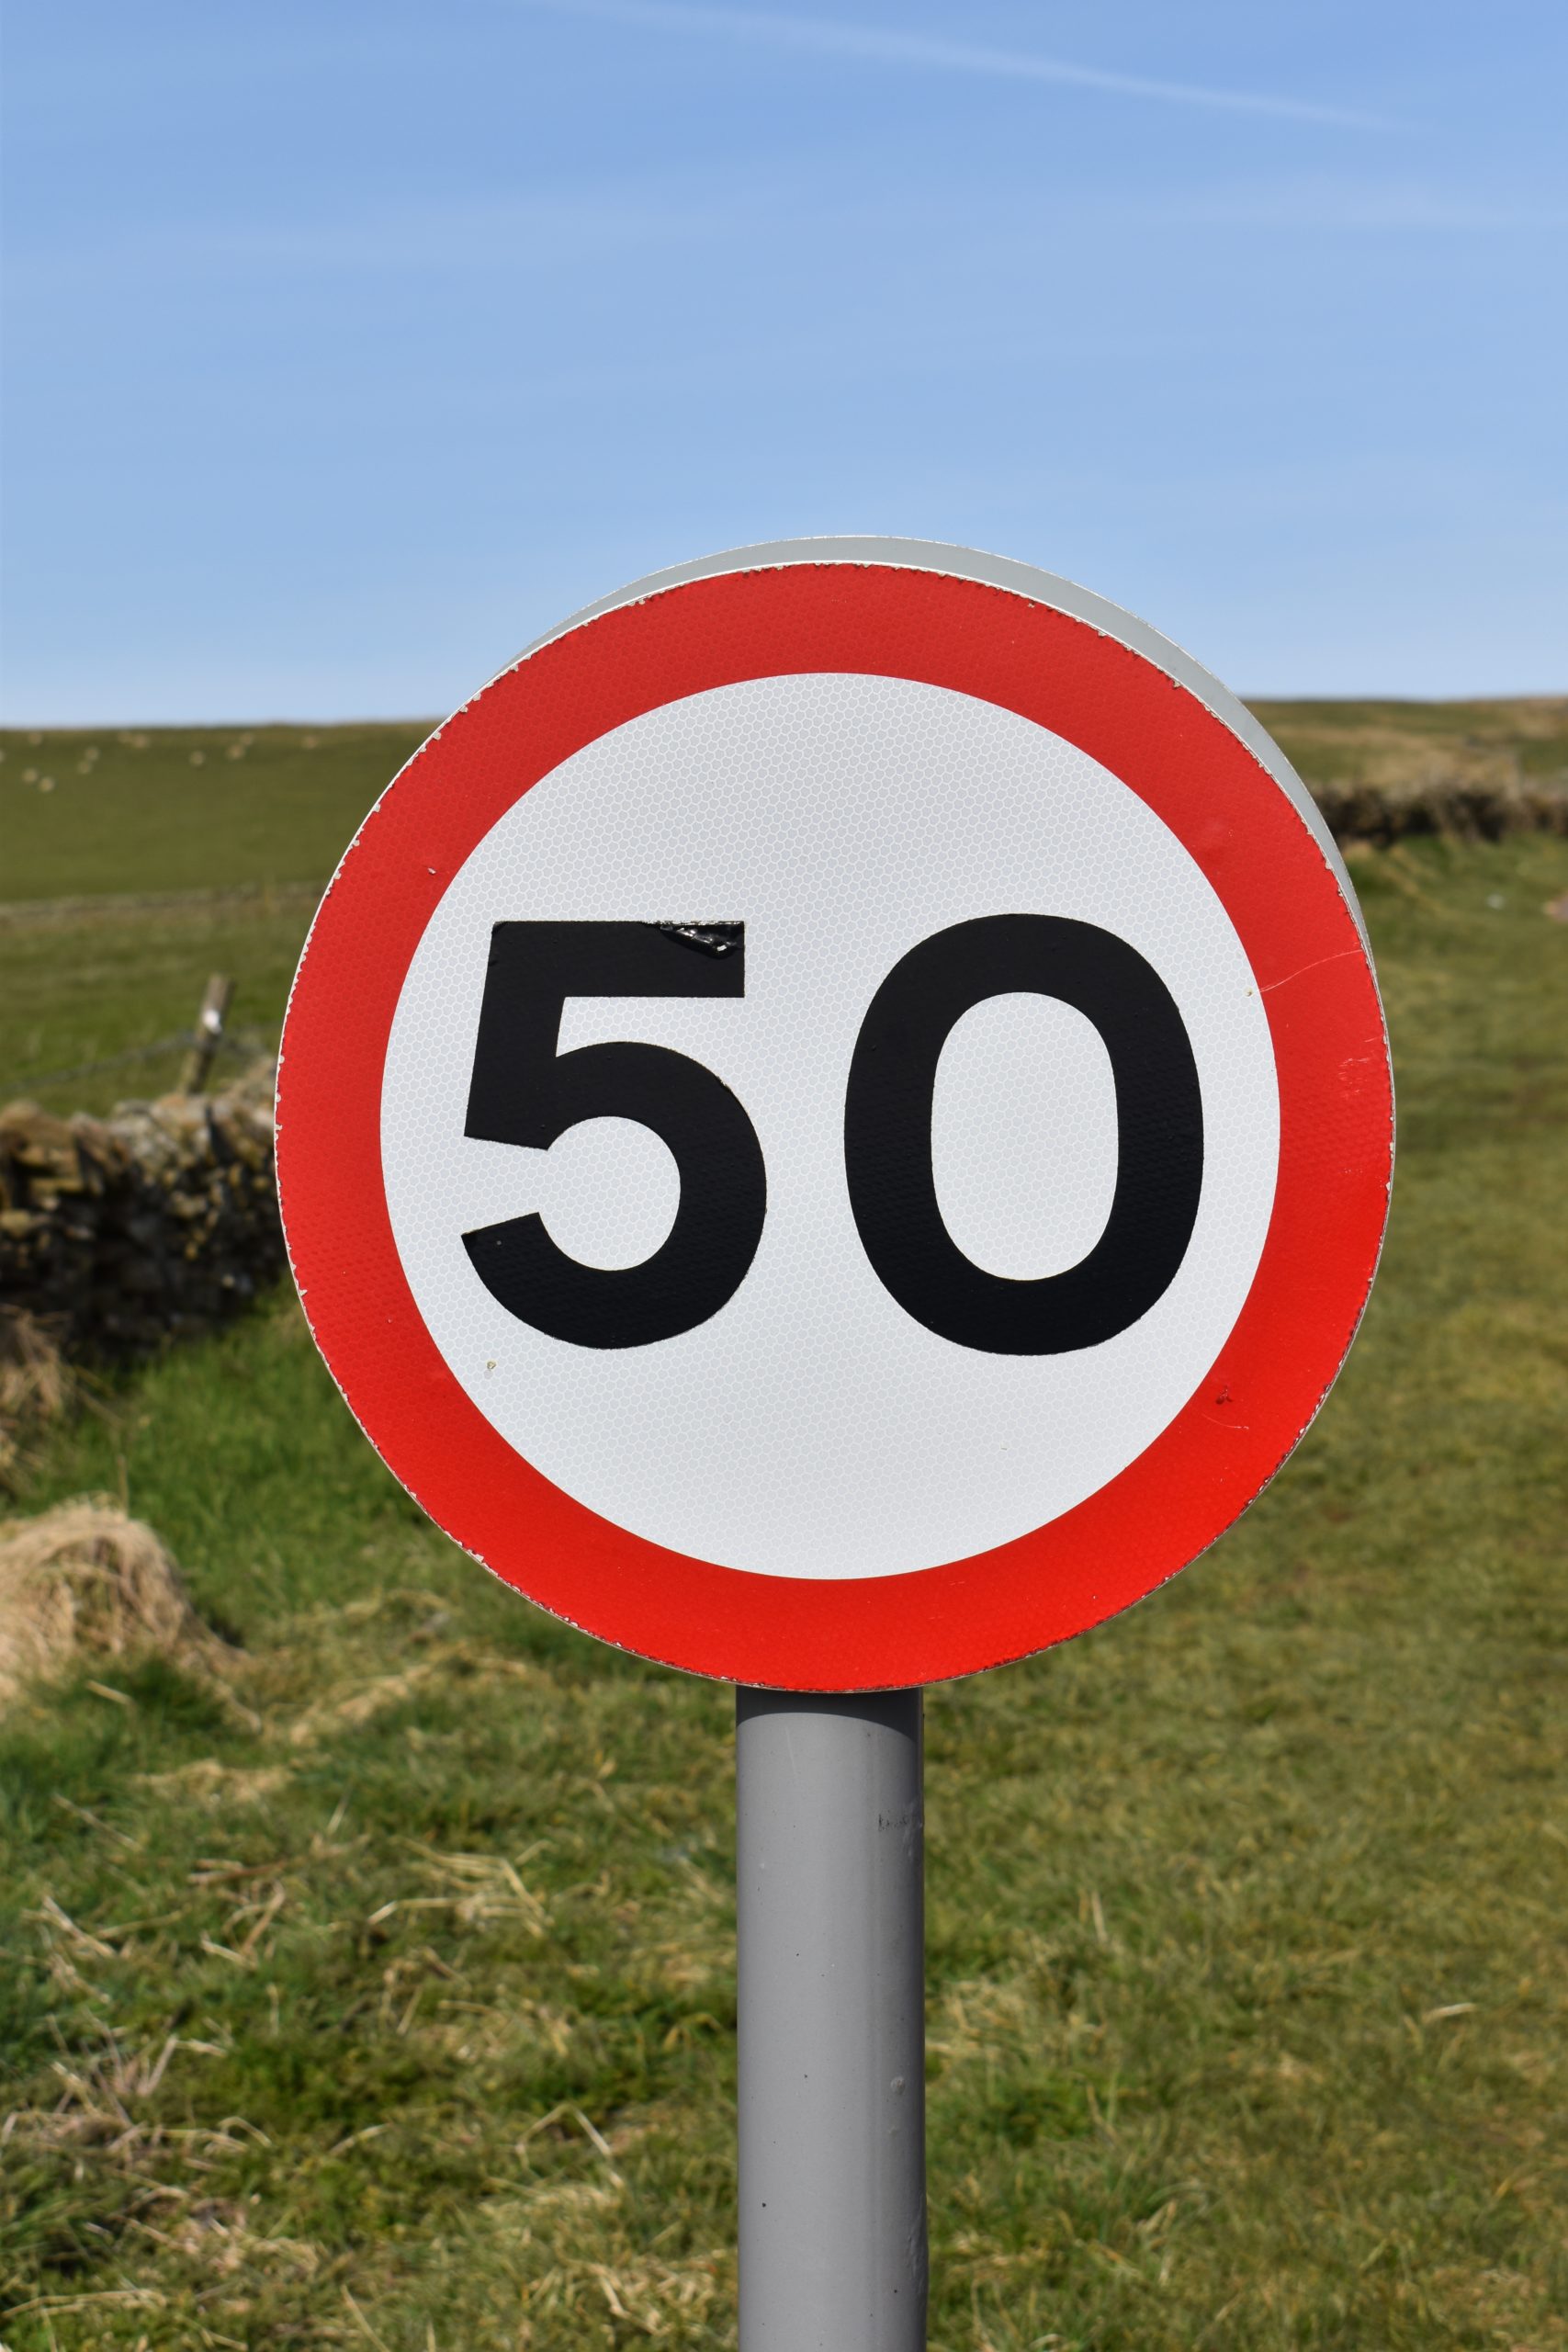 Circular traffic sign depicting 50 speed limit. Circular sign with a white background, black numbers and a red border around the edge. Countryside in the background behind the sign.